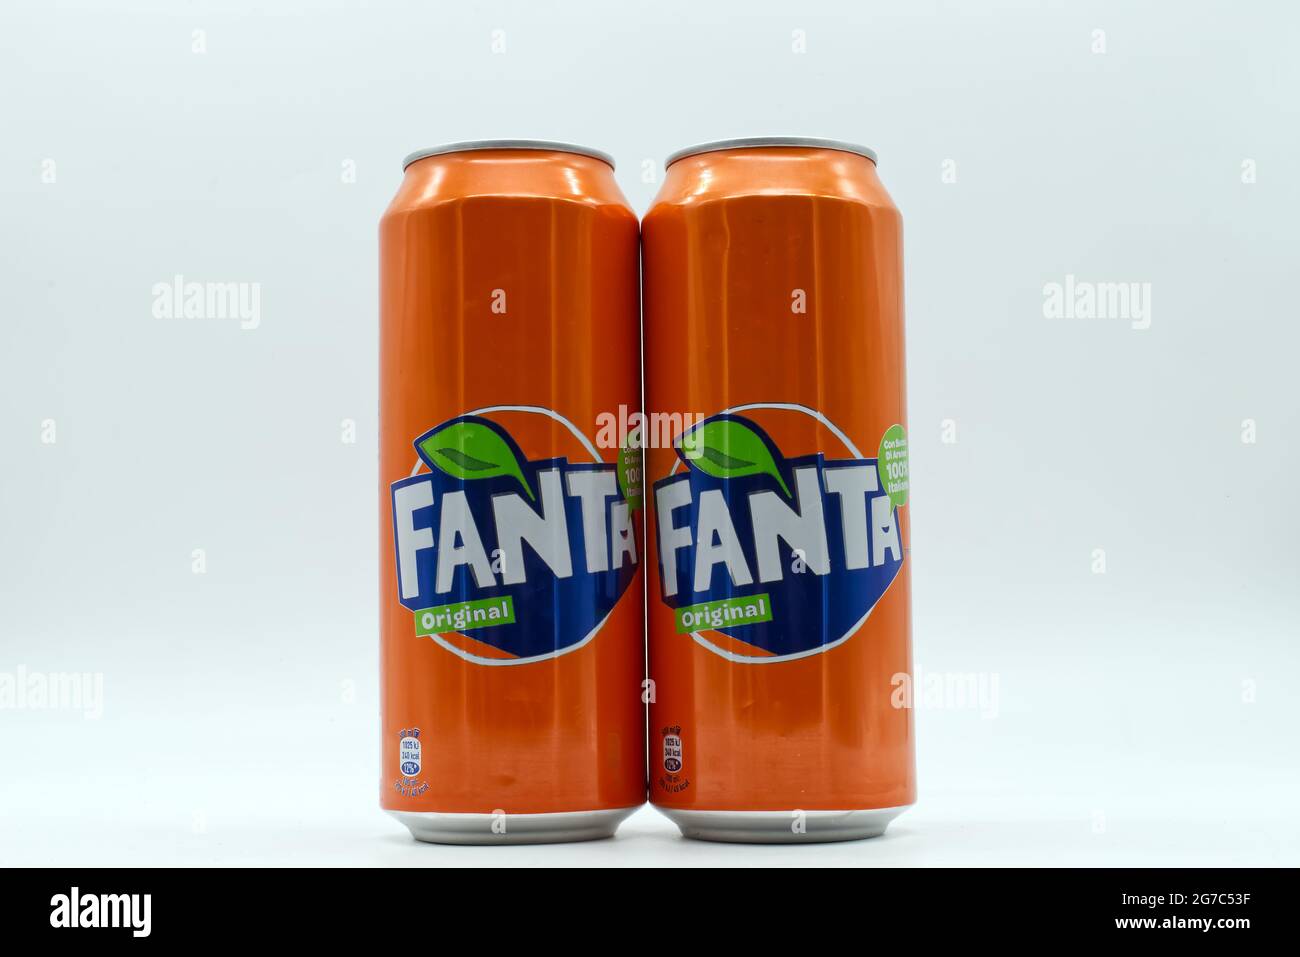 Bologna - Italy - July 12, 2021: Cans of Fanta soda isolated on white background Stock Photo